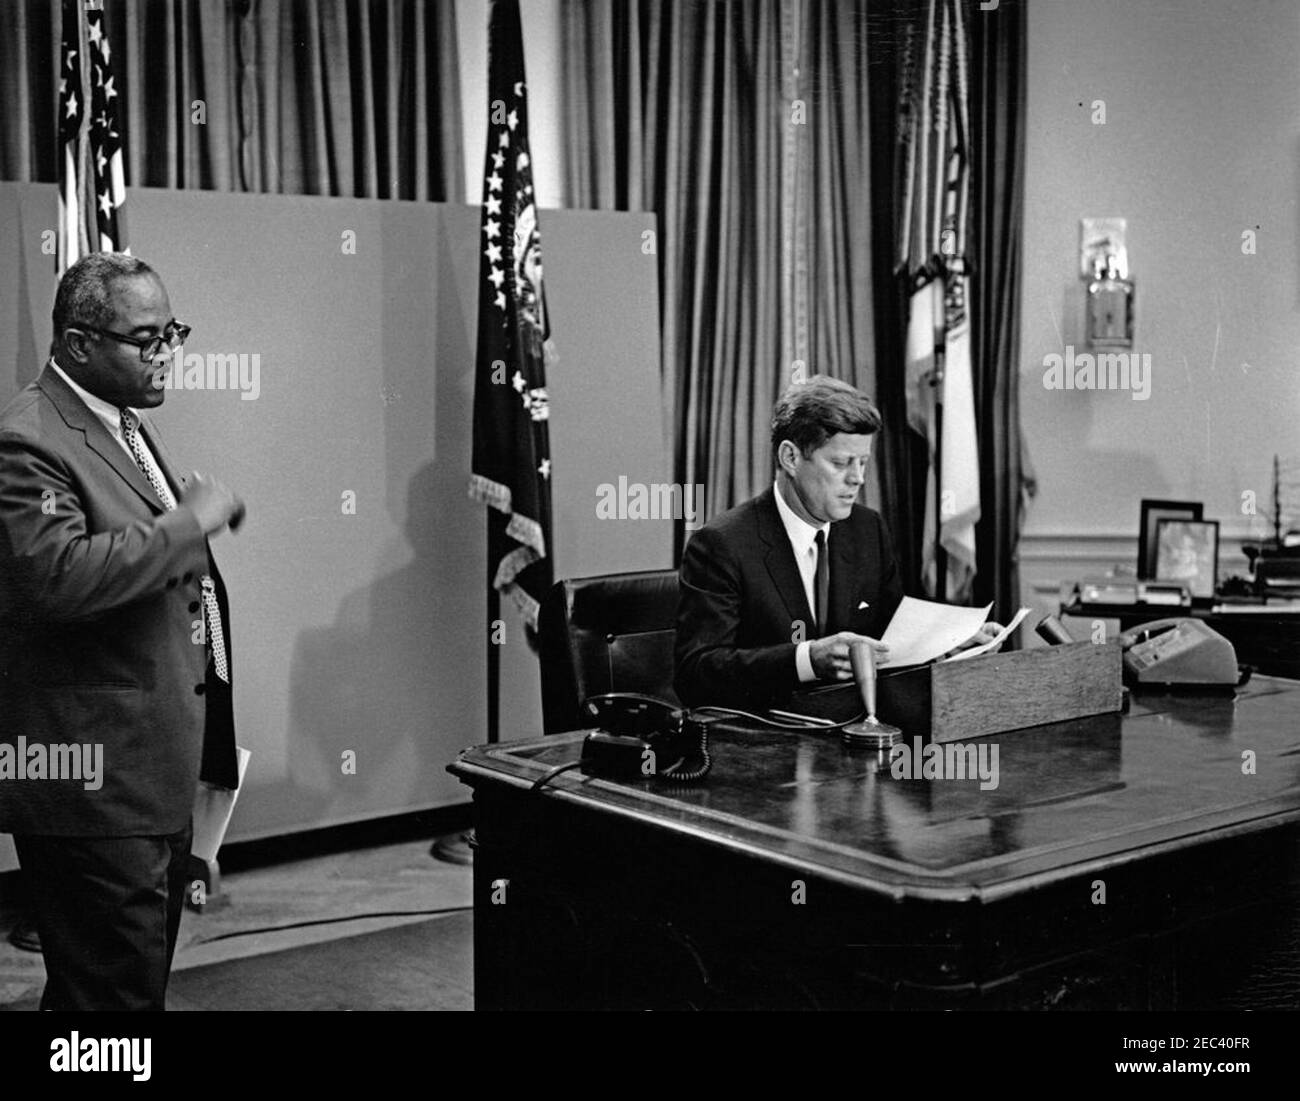 Radio u0026 Television Address to the Nation regarding desegregation at the University of Alabama, 8:00PM. President John F. Kennedy prepares to deliver a radio and television address to the nation regarding desegregation at the University of Alabama. Associate Press Secretary, Andrew T. Hatcher, stands at left. Oval Office, White House, Washington, D.C. Stock Photo